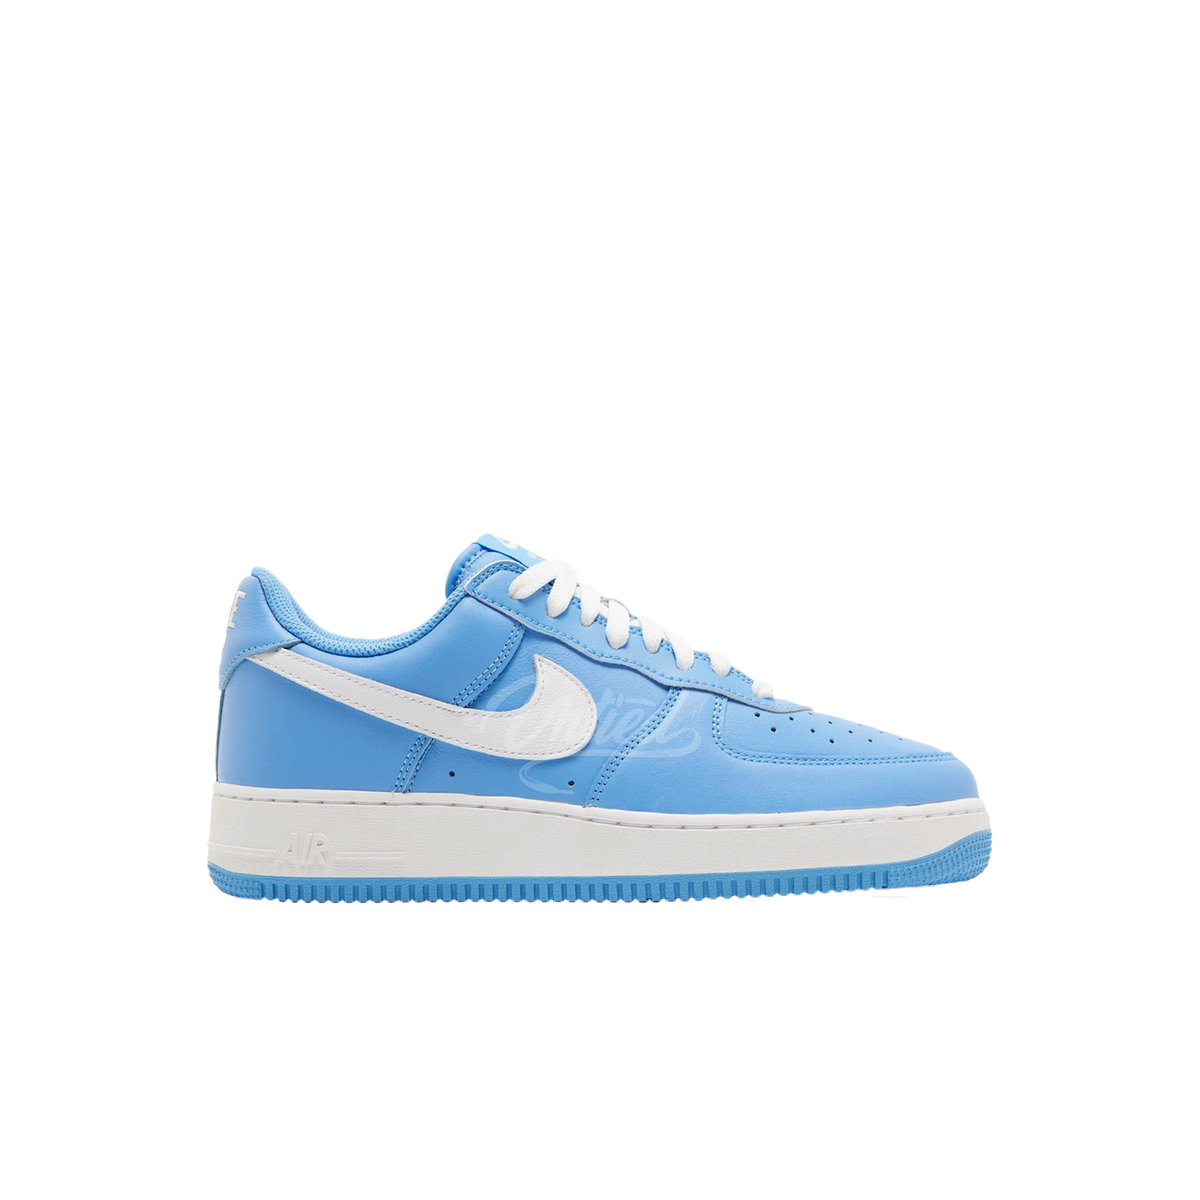 Air Force 1 Color of the Month "University Blue"